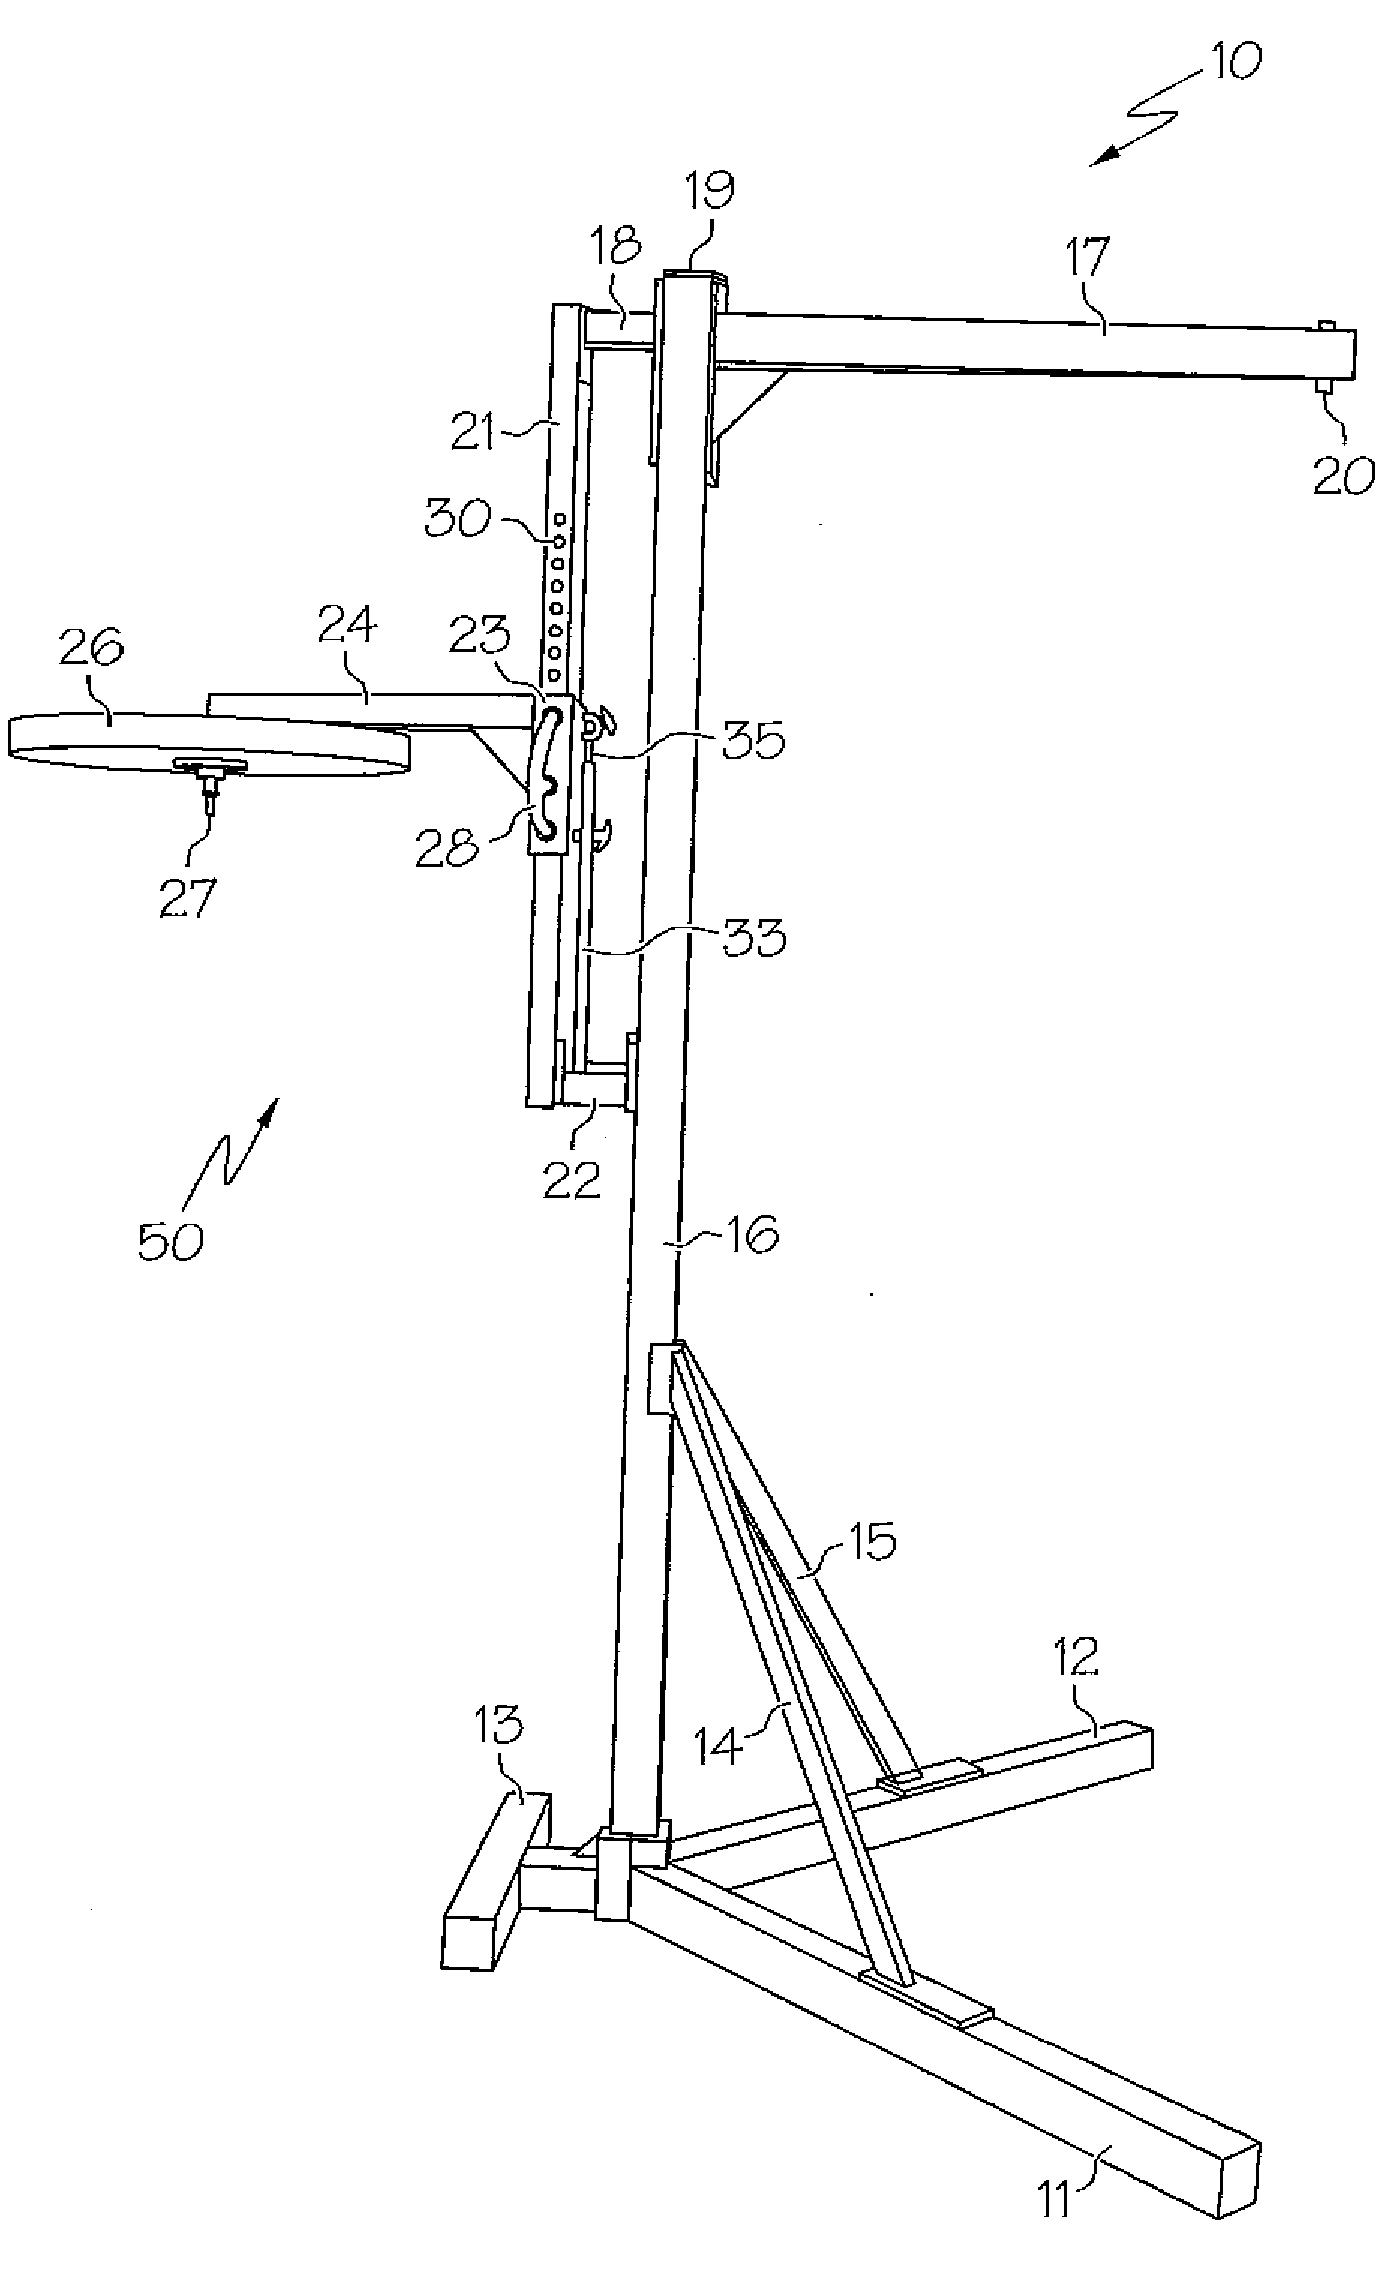 Adjustable heavy bag/speed bag frame with piston assist